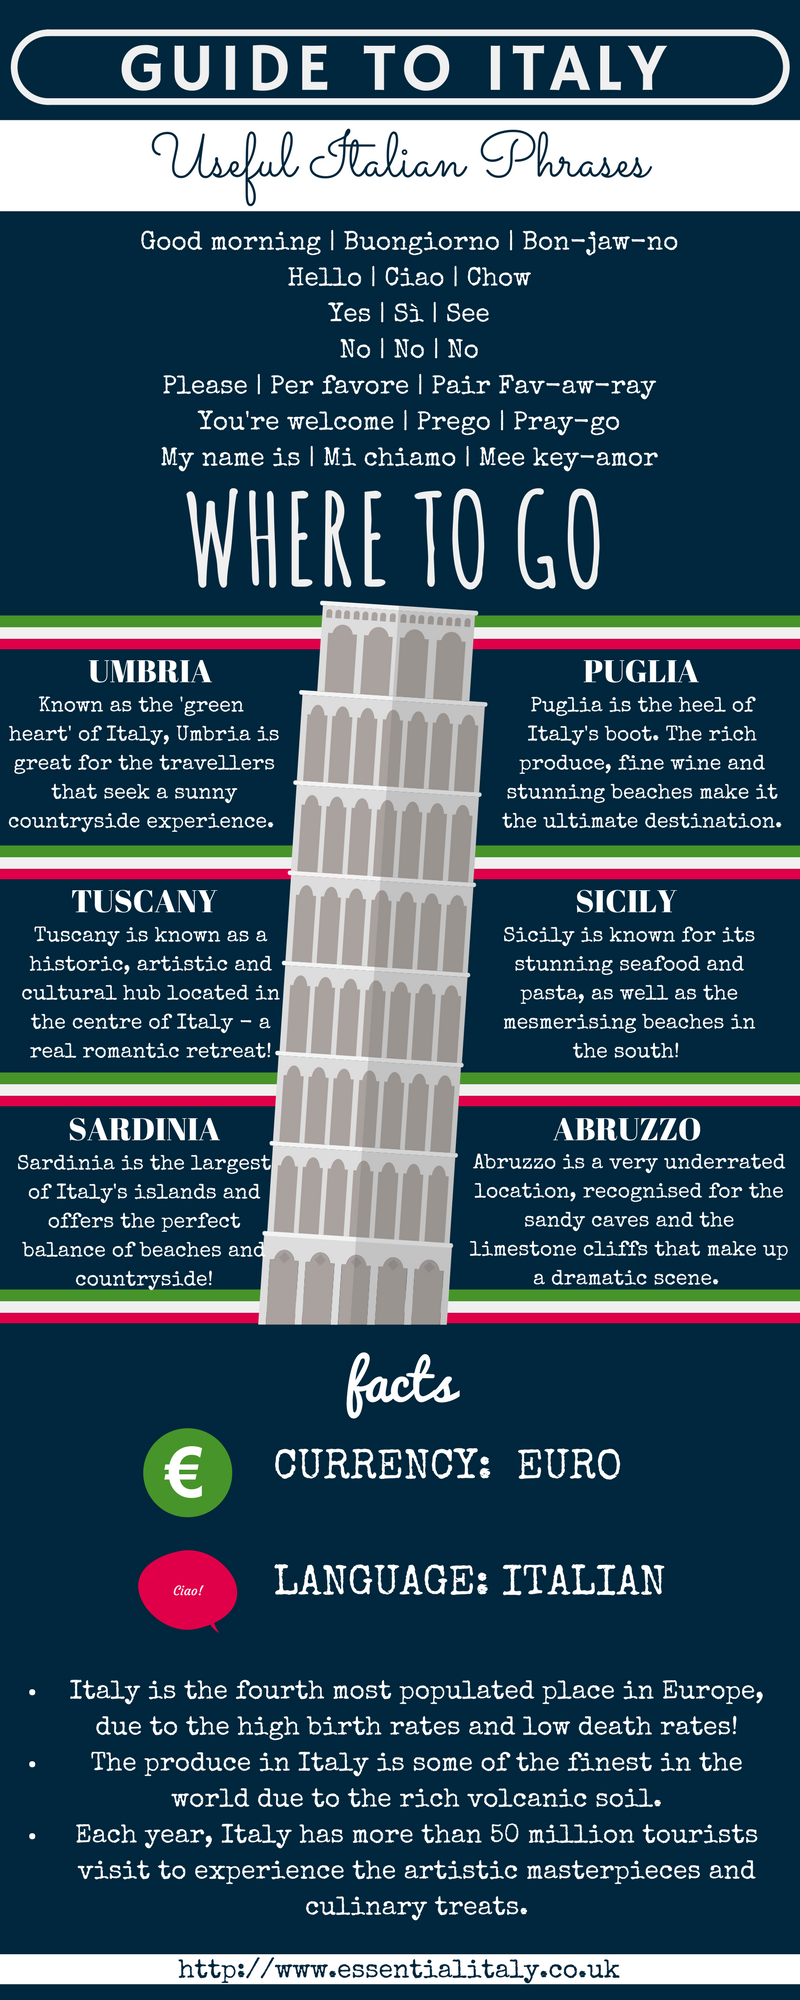 Guide to Italy infographic